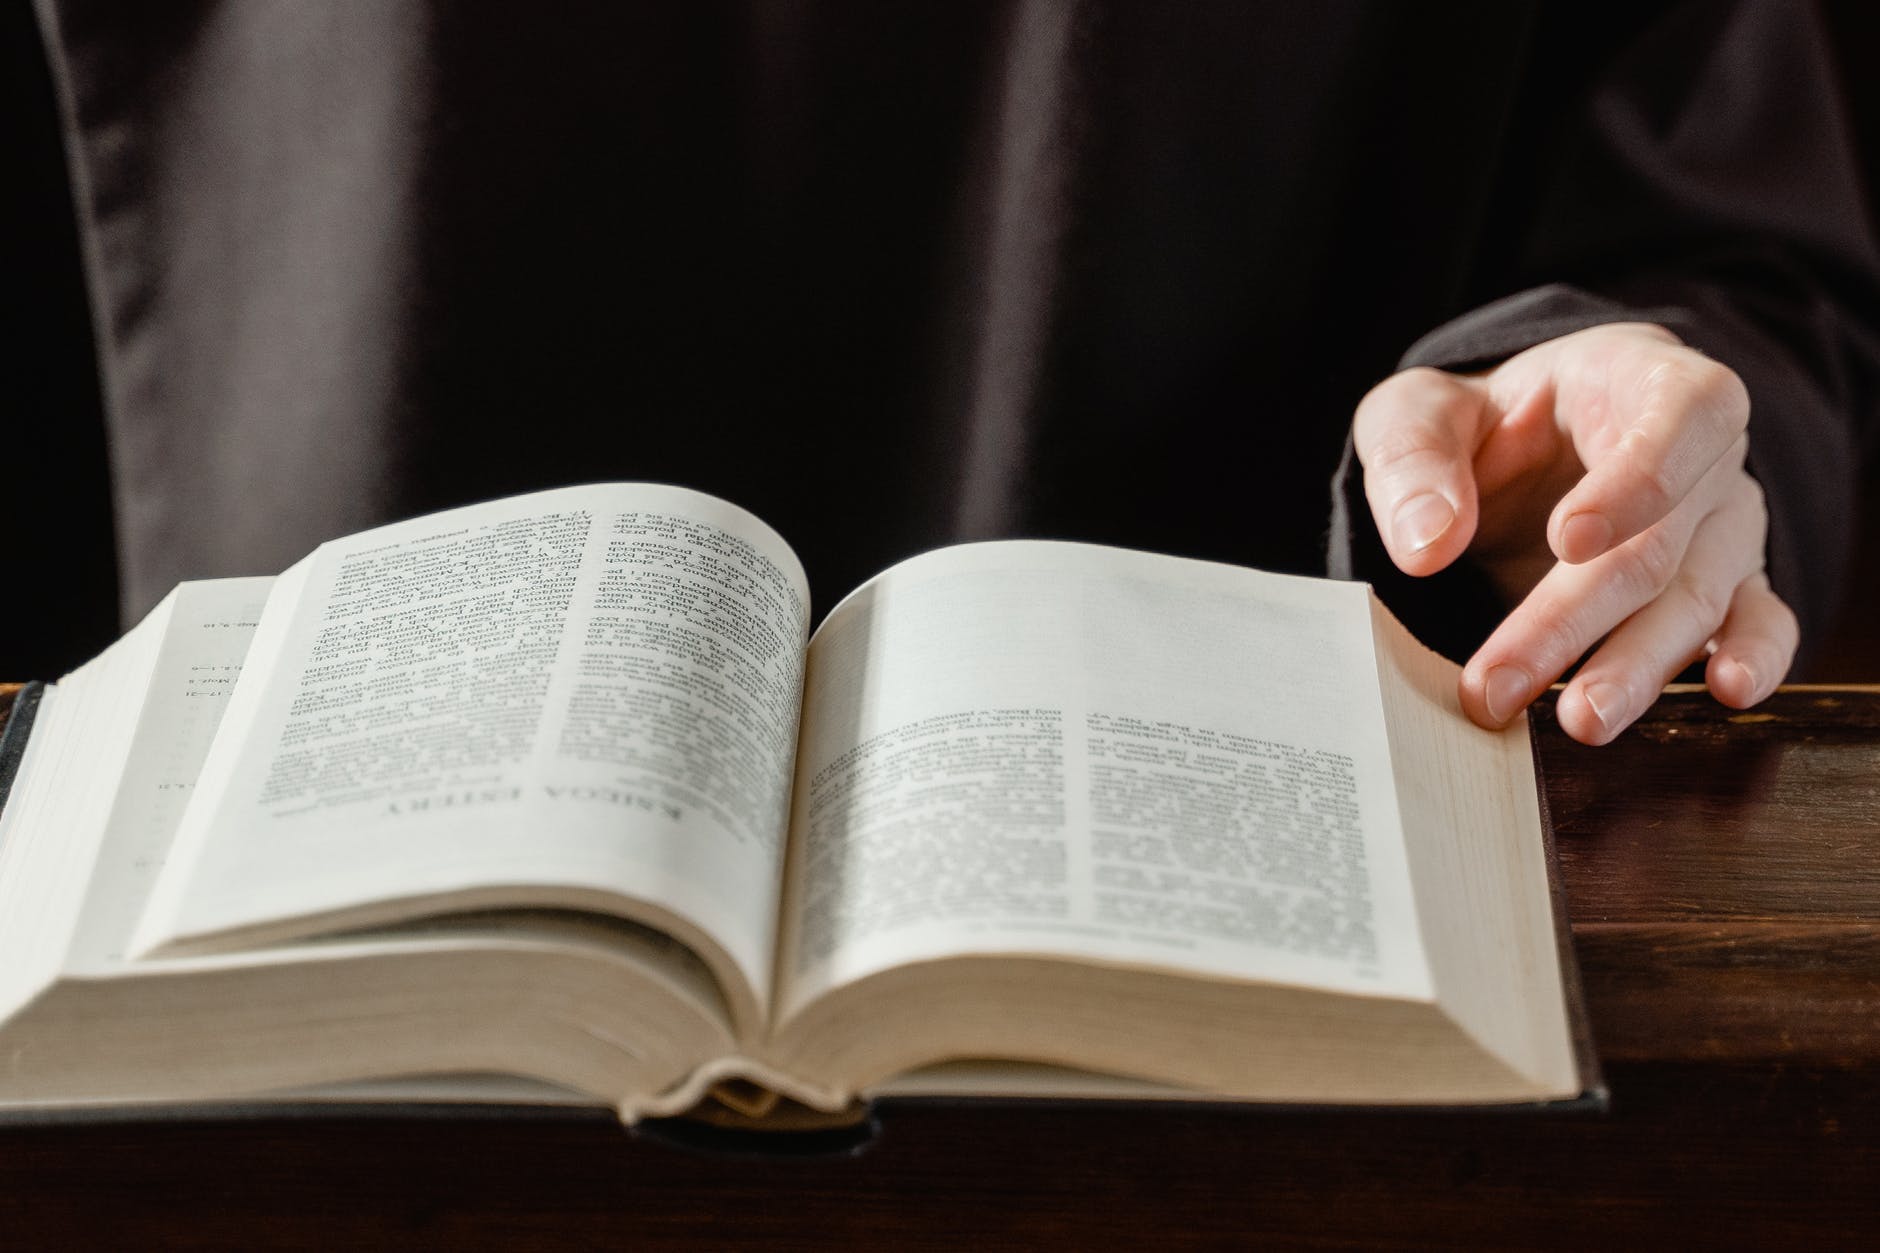 A close up of an open bible | Source: Pexels